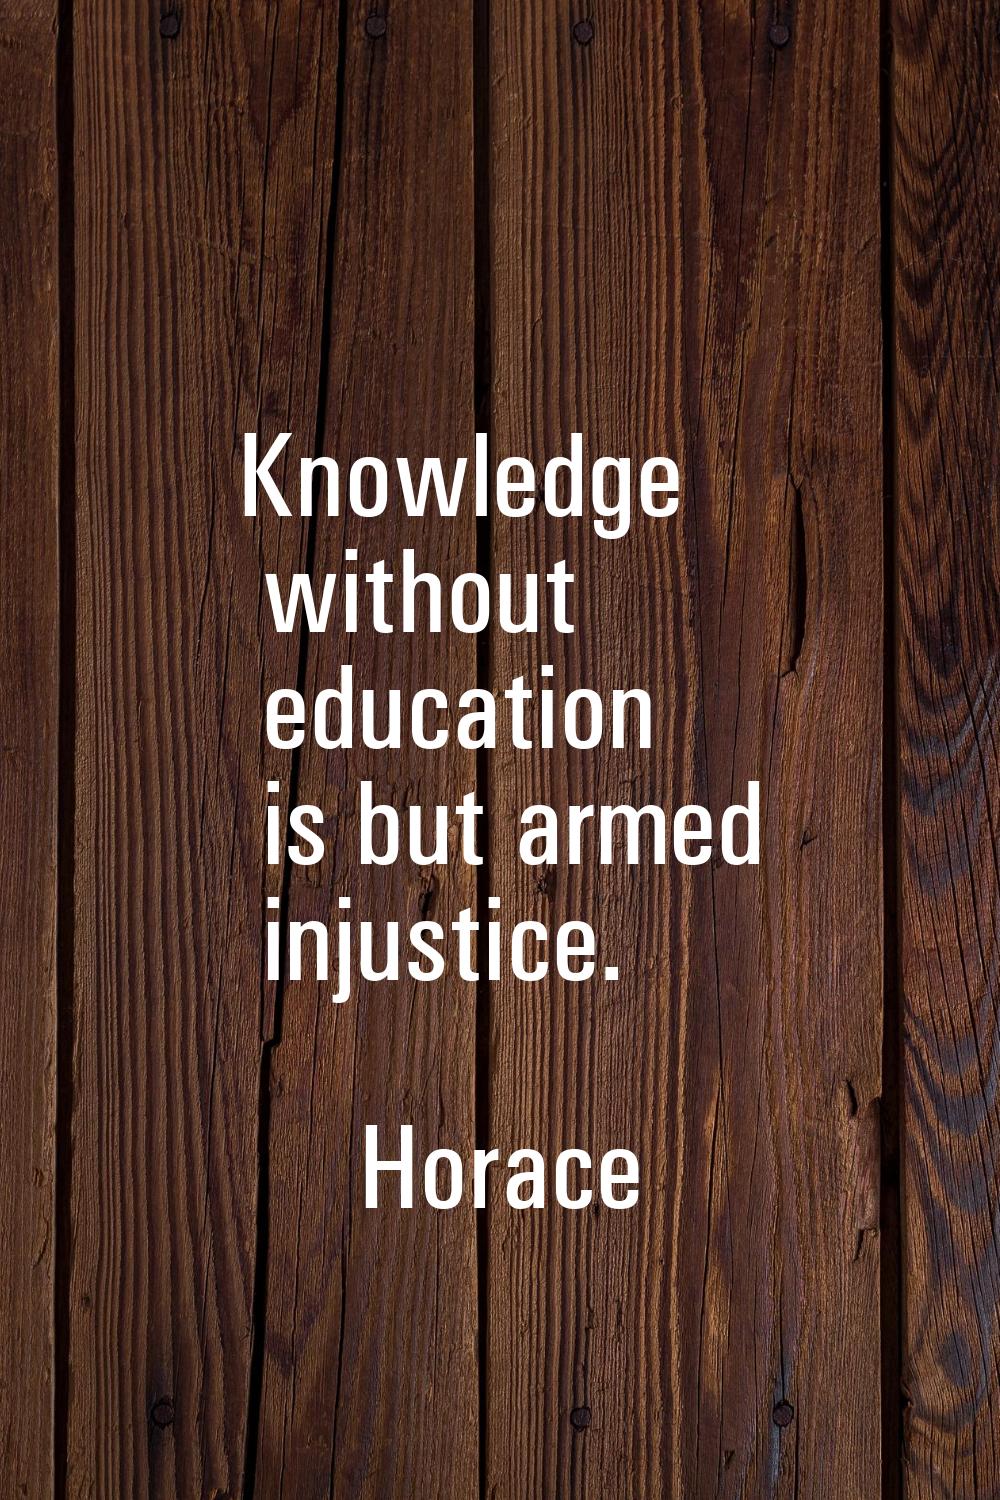 Knowledge without education is but armed injustice.